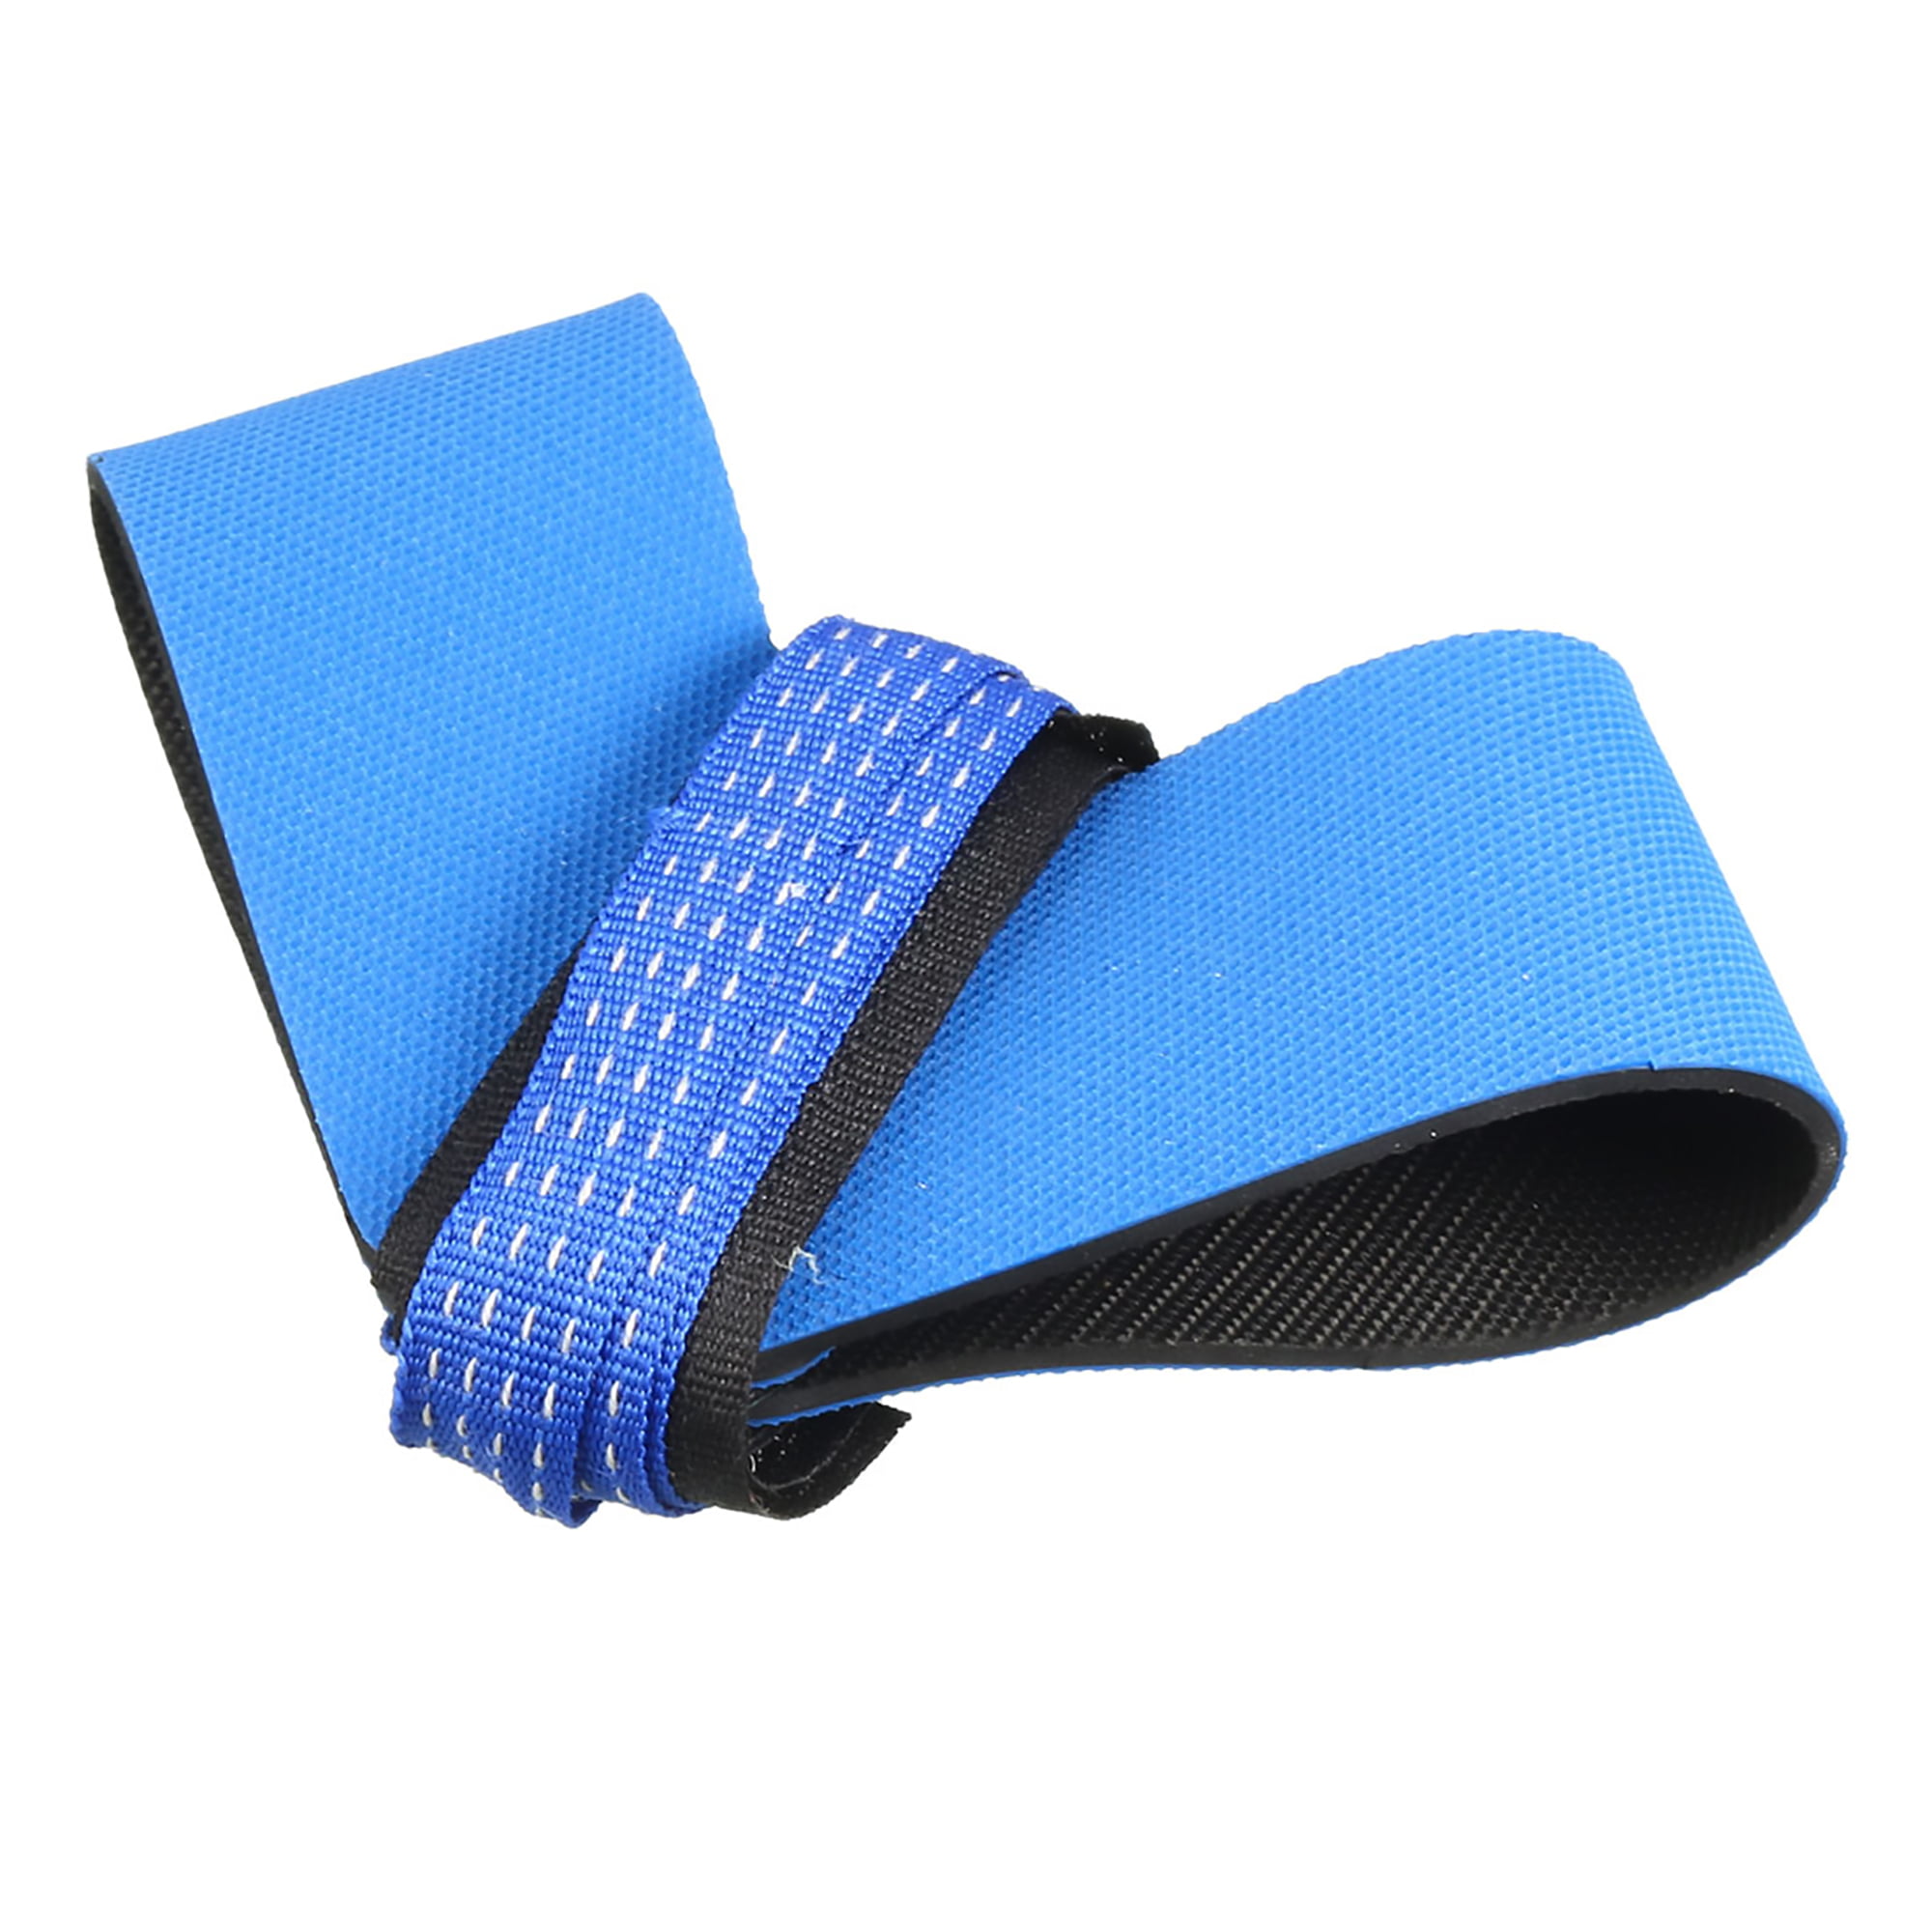 Anti Static ESD Adjustable Foot Strap Heel electronic Discharge Band GroundYCH@. 